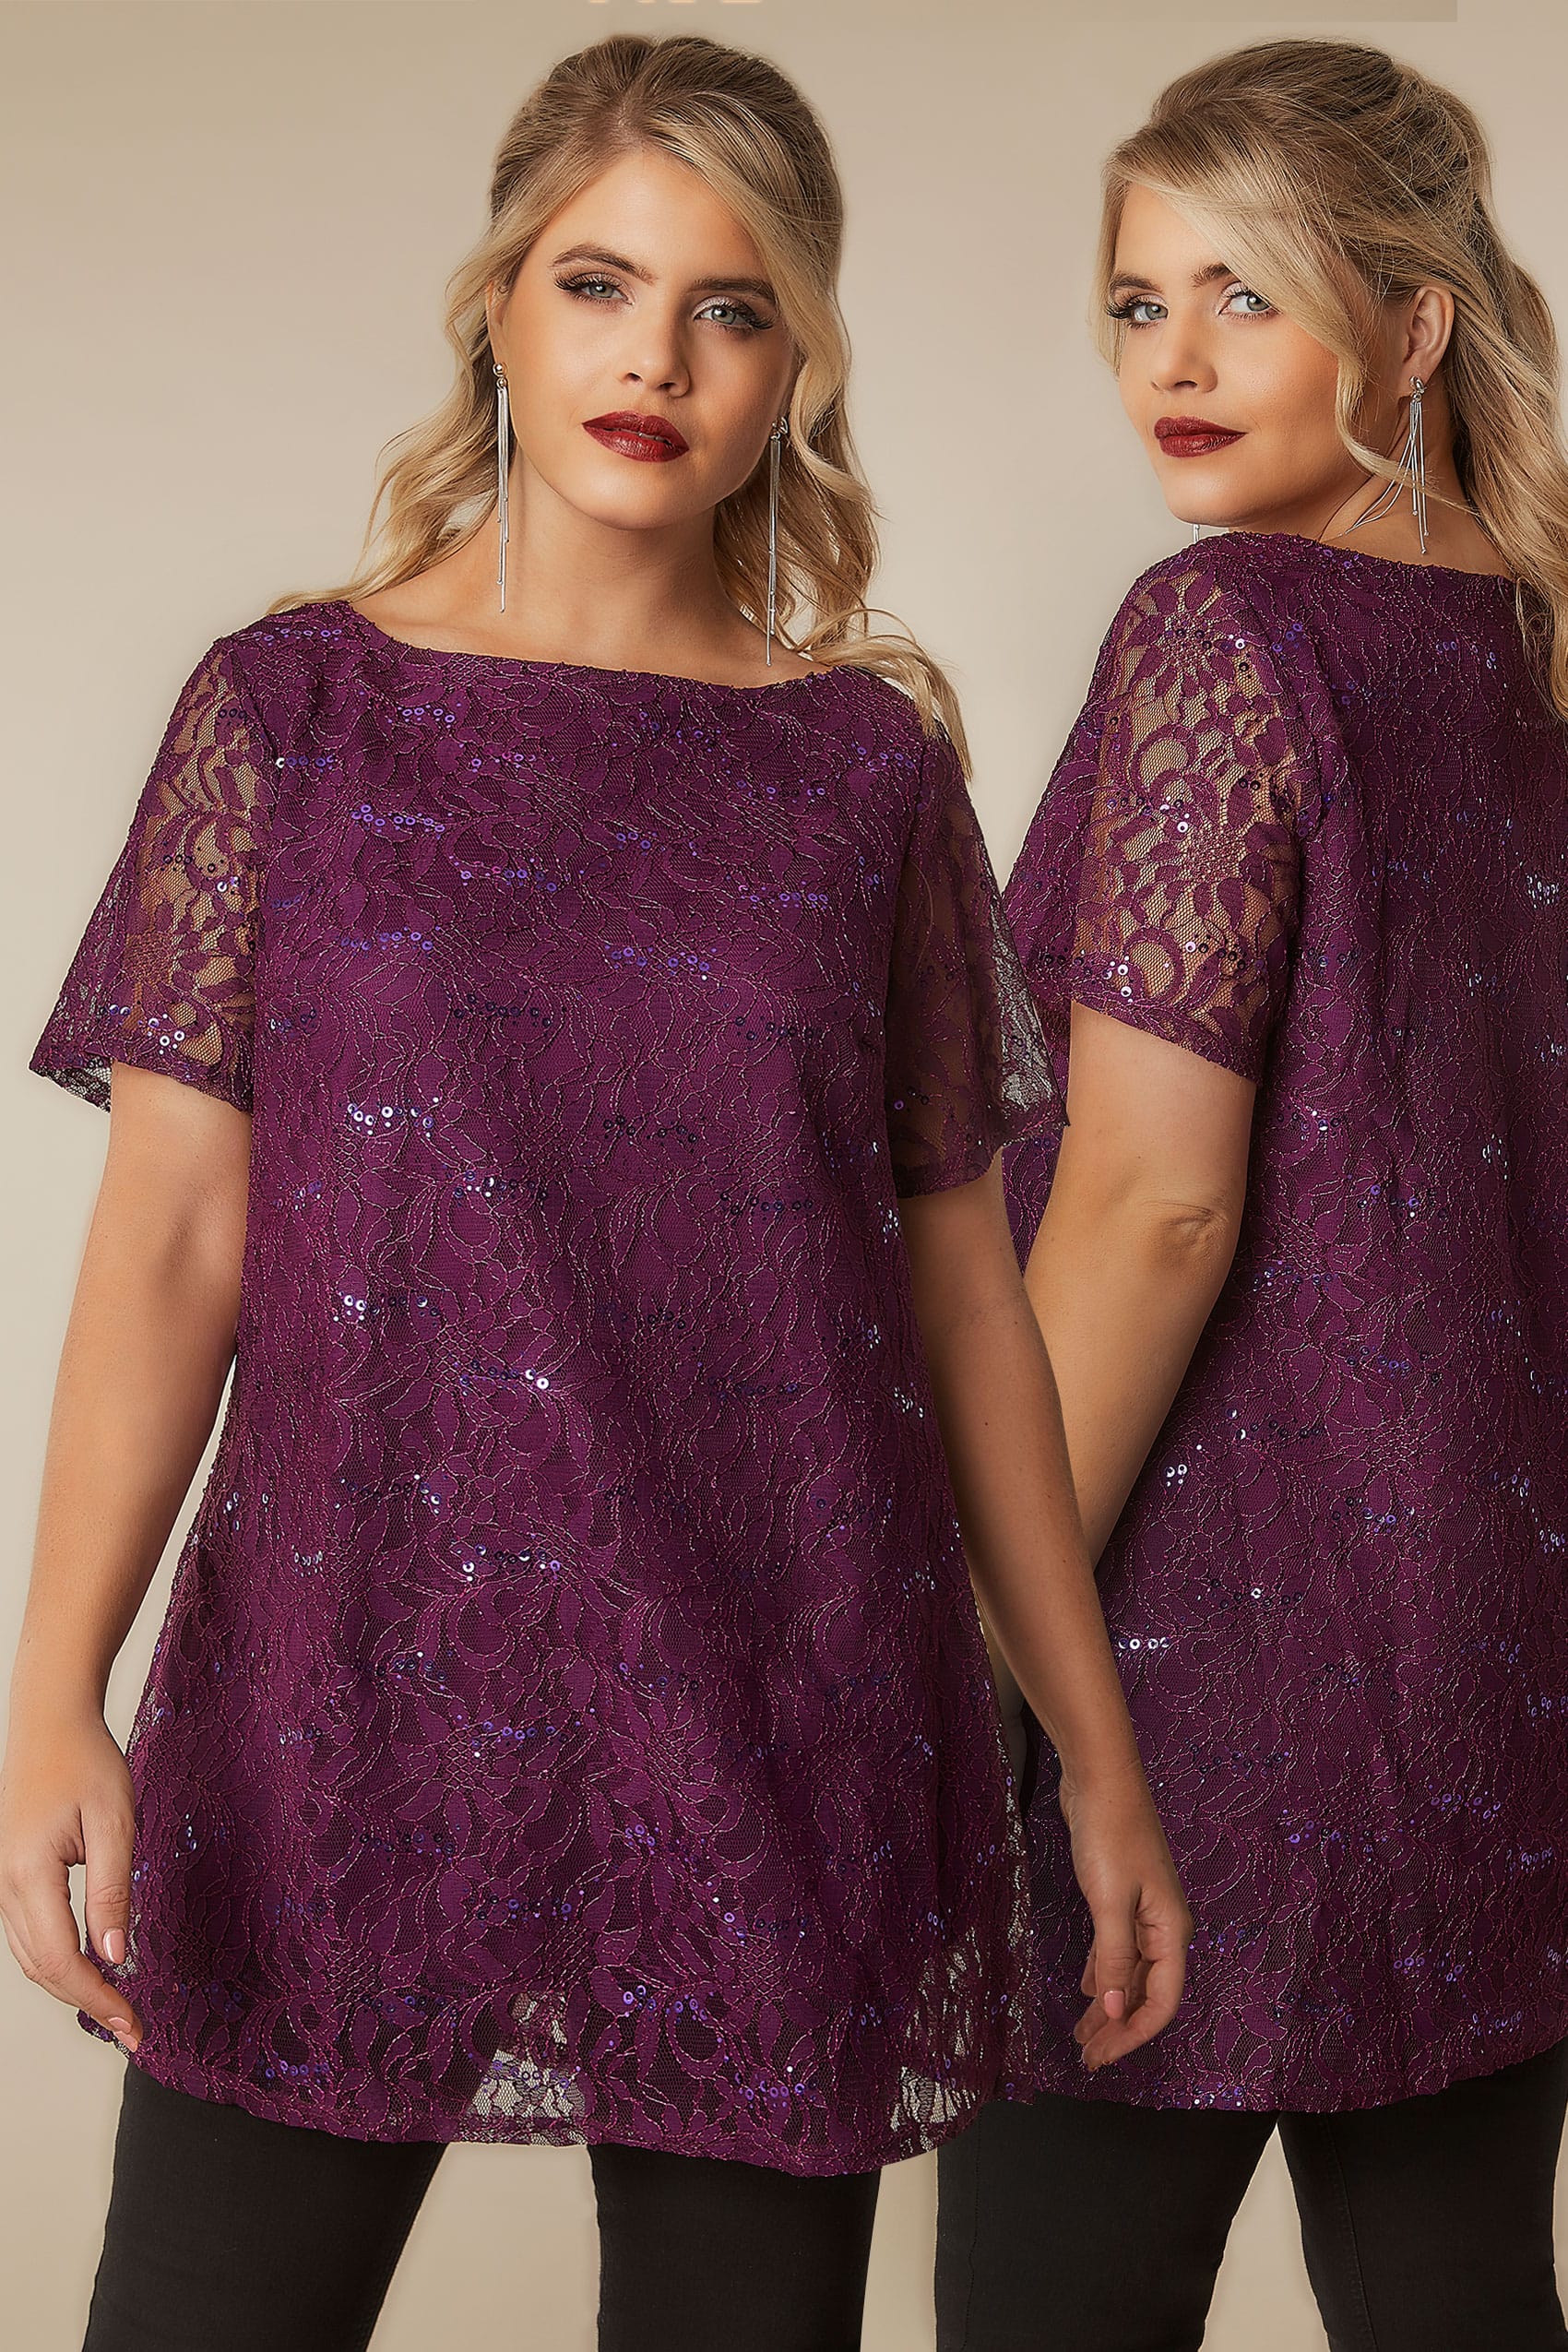 Dark Purple Lace Shell Top With Sequin Details, plus size 16 to 36